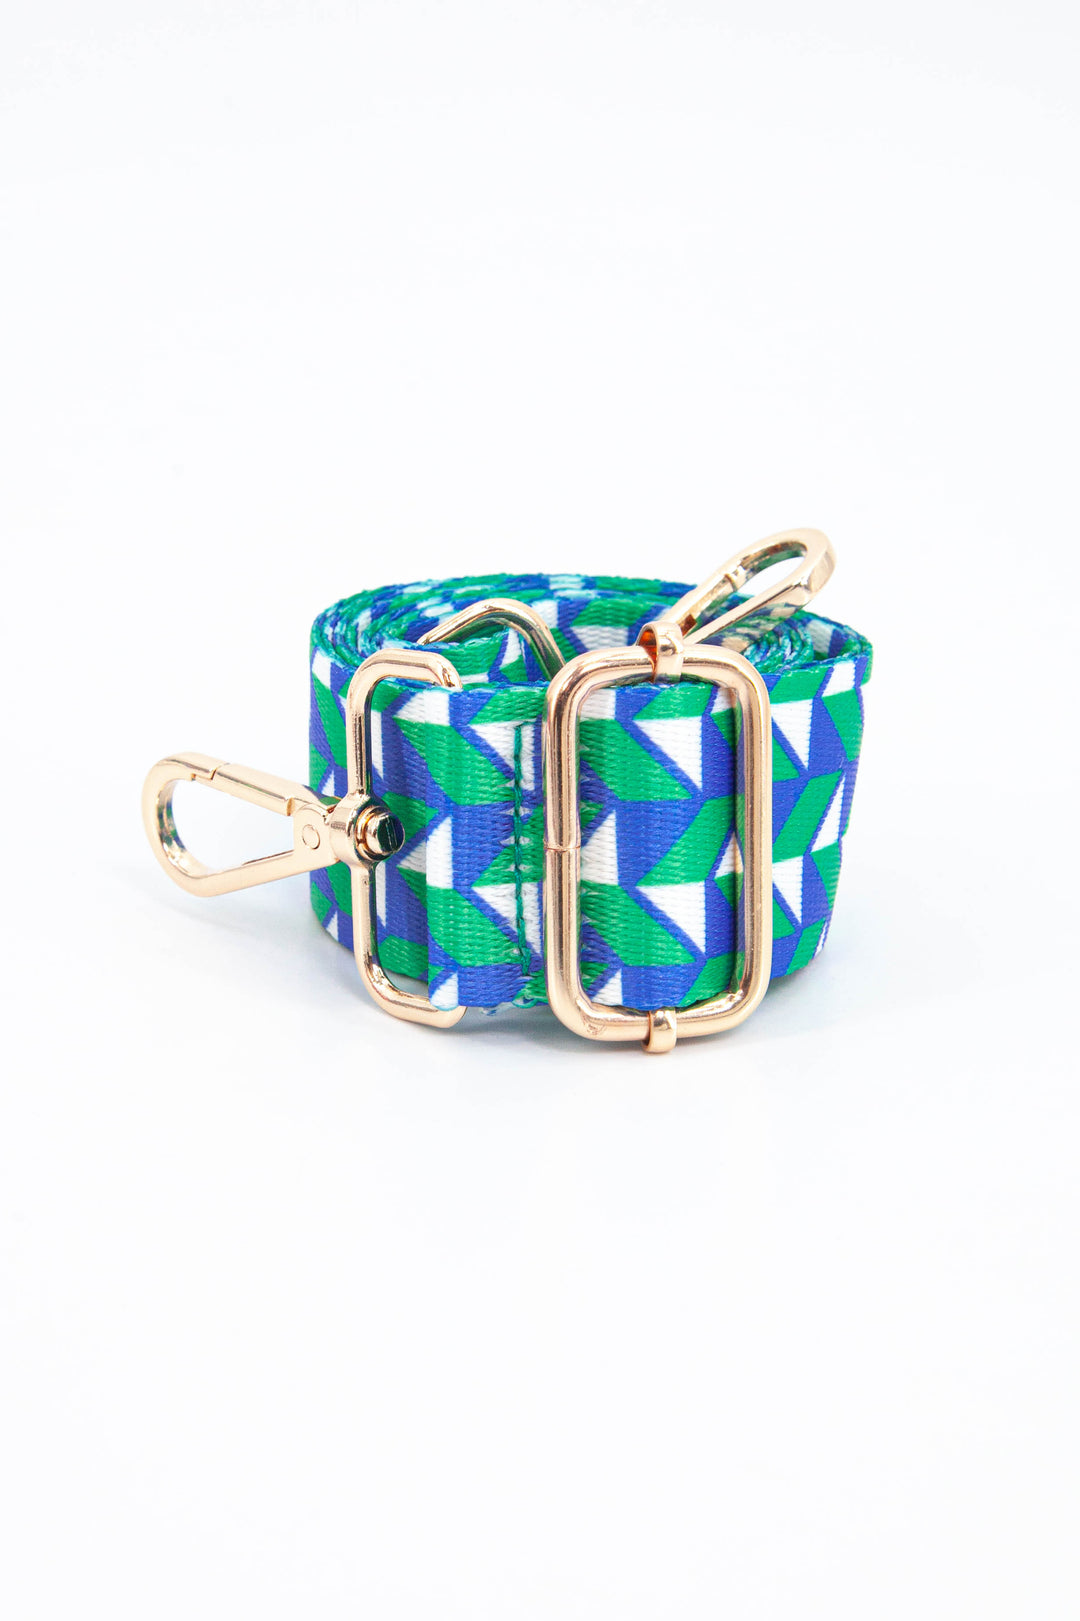 close up of the green and blue geometric chevron pattern and gold adjustment buckle